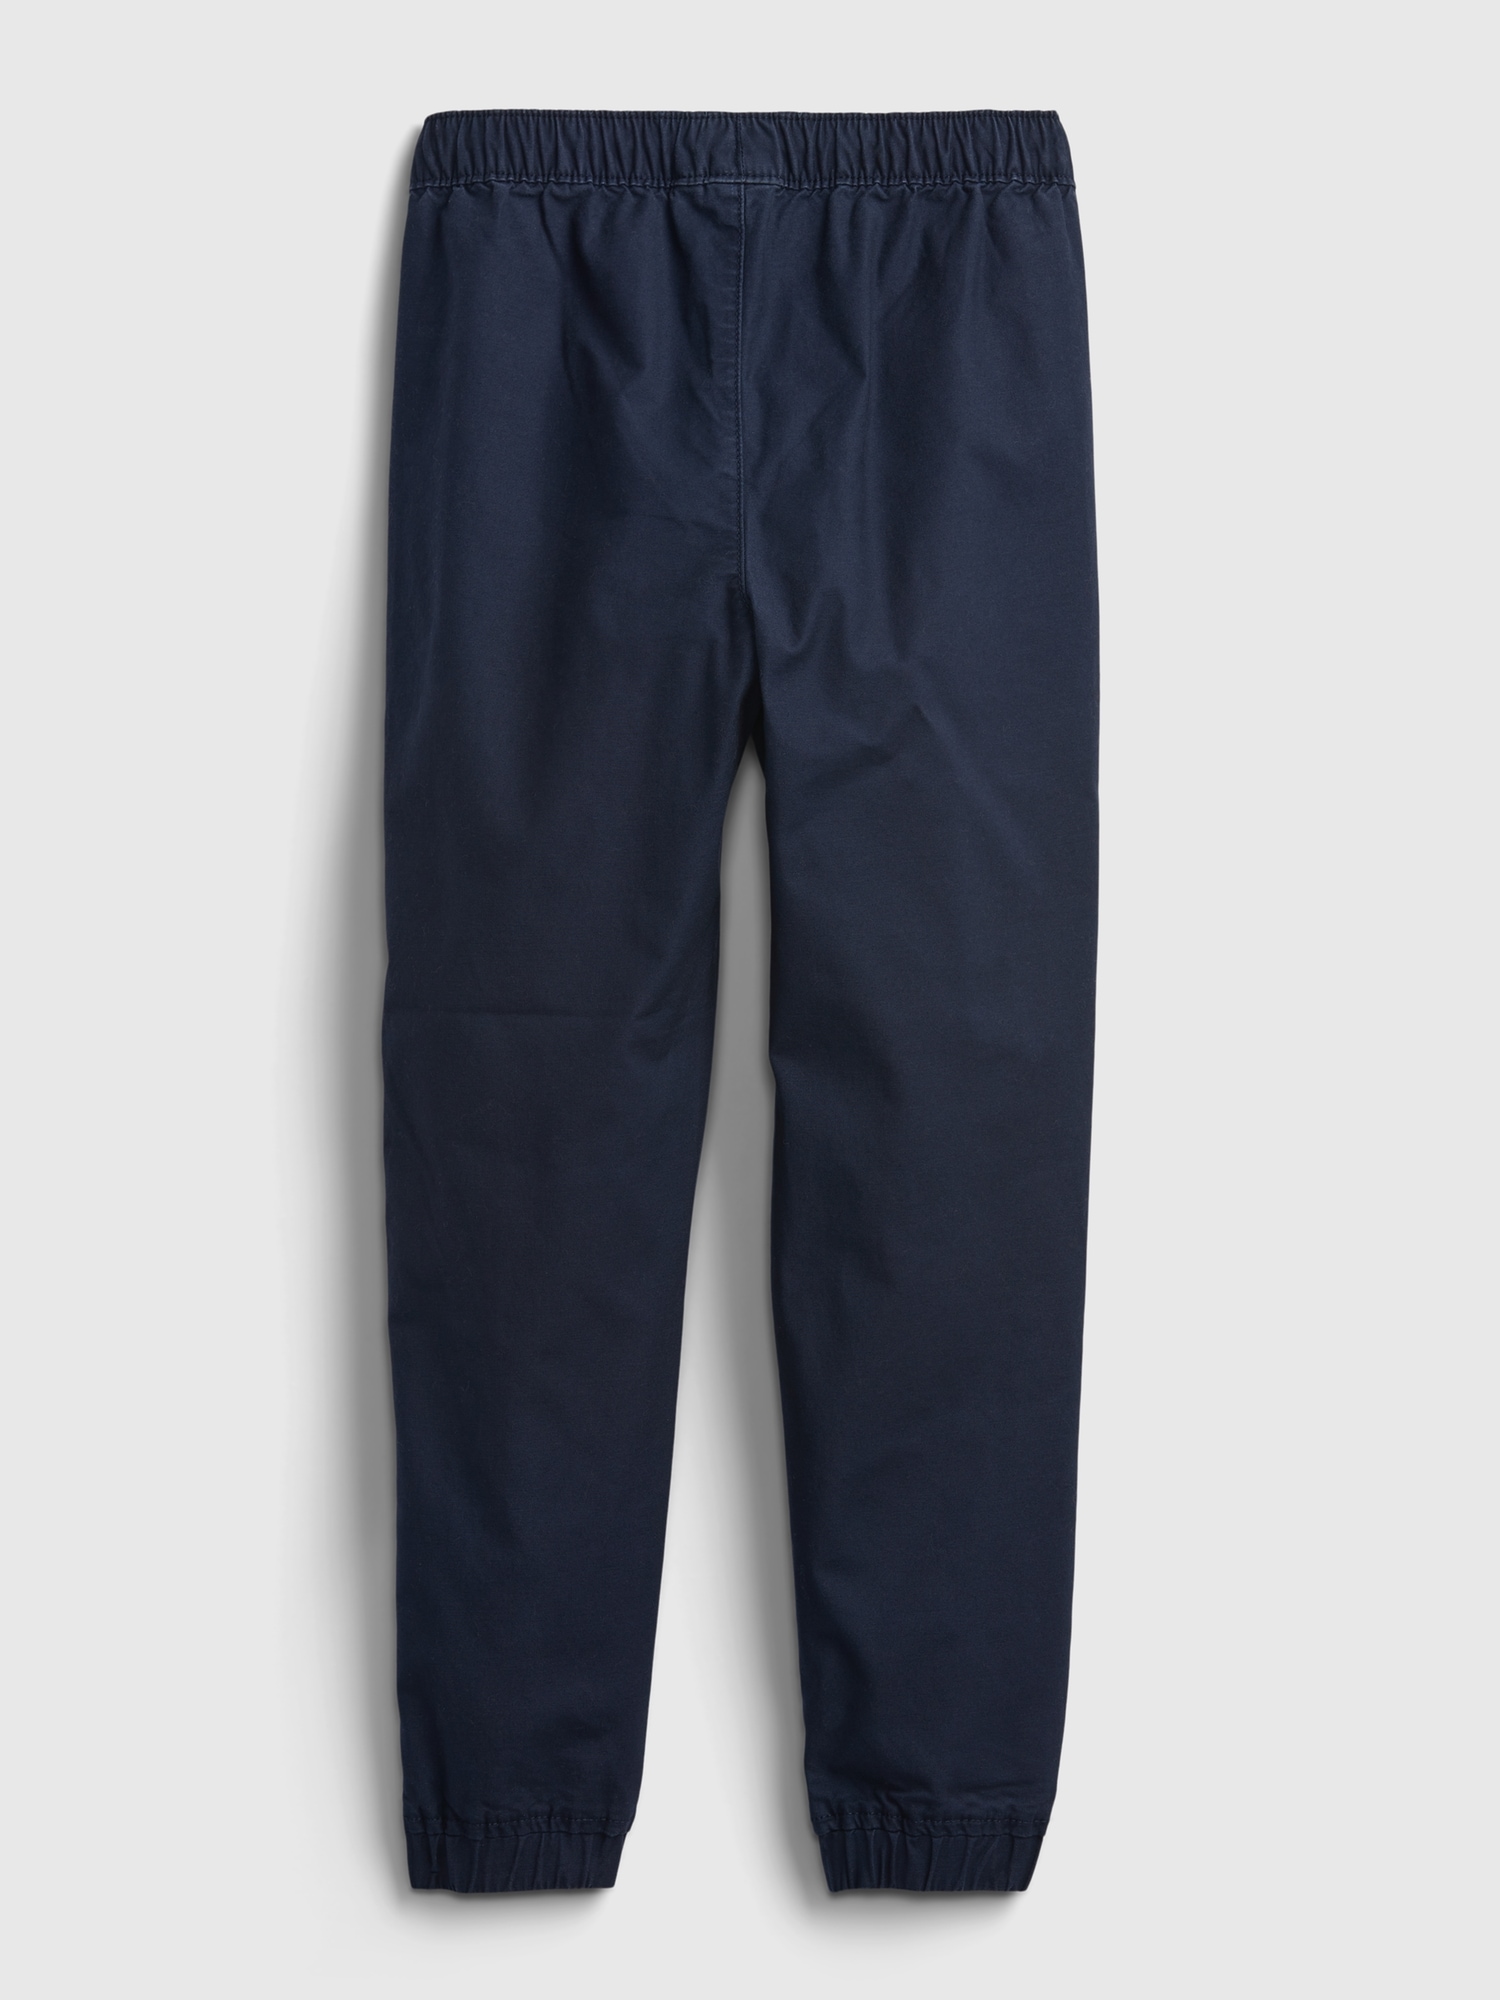 Kids Everyday Joggers with Washwell | Gap